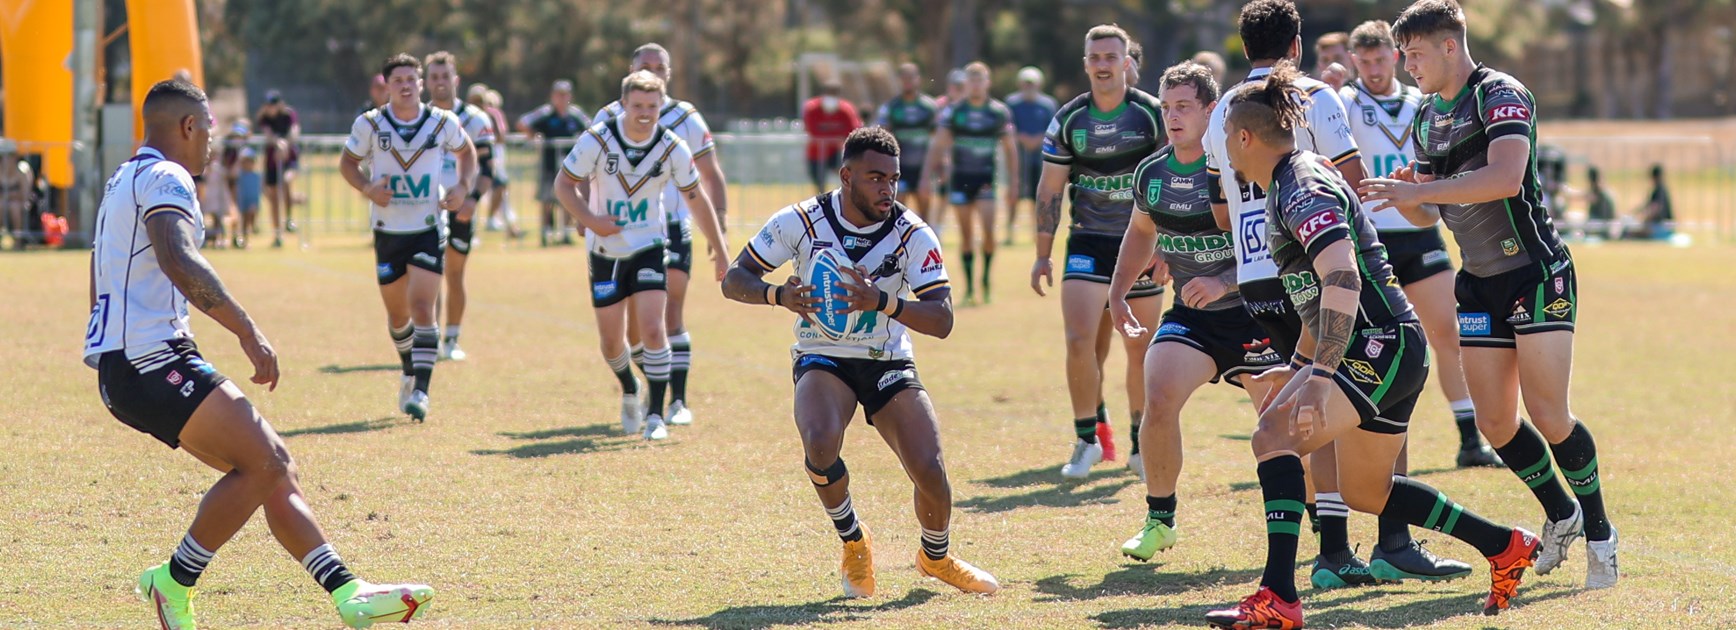 Mam's the man for Souths Logan Magpies